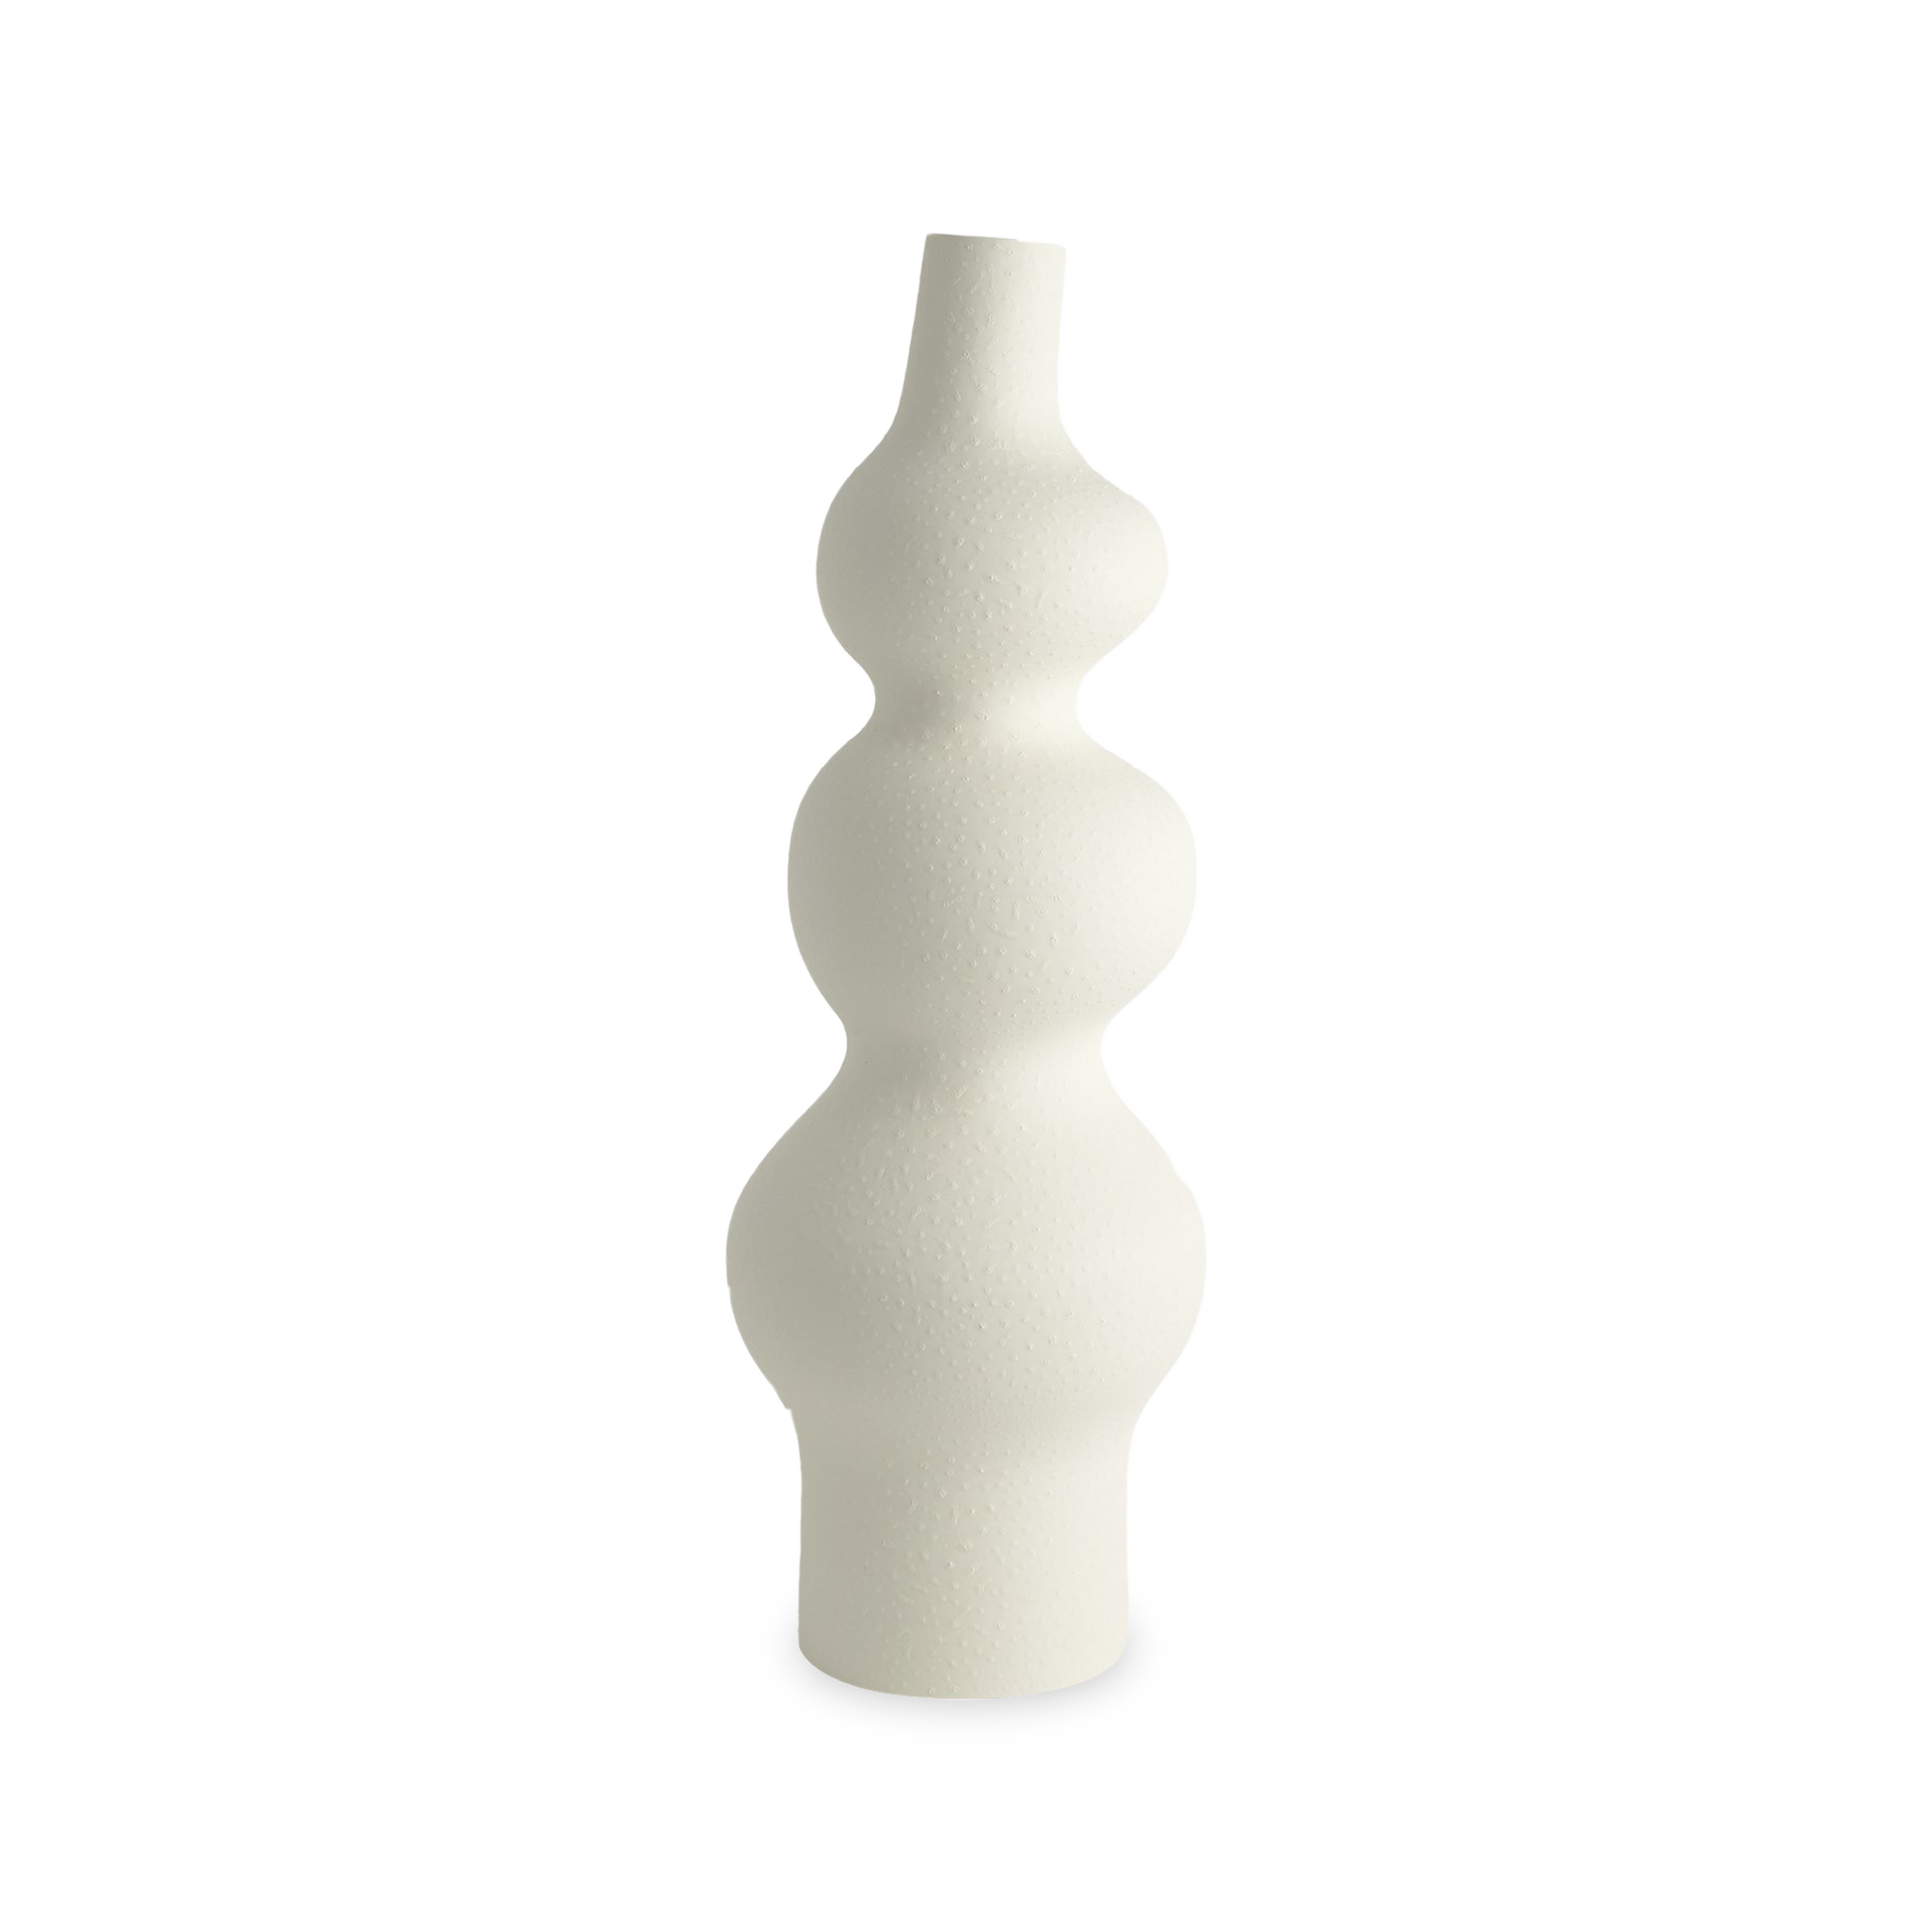 With round lines and a pleasant silhouette, the Bubbled Tower Vase in Matte White combines texture and an organic form for decorative drama.